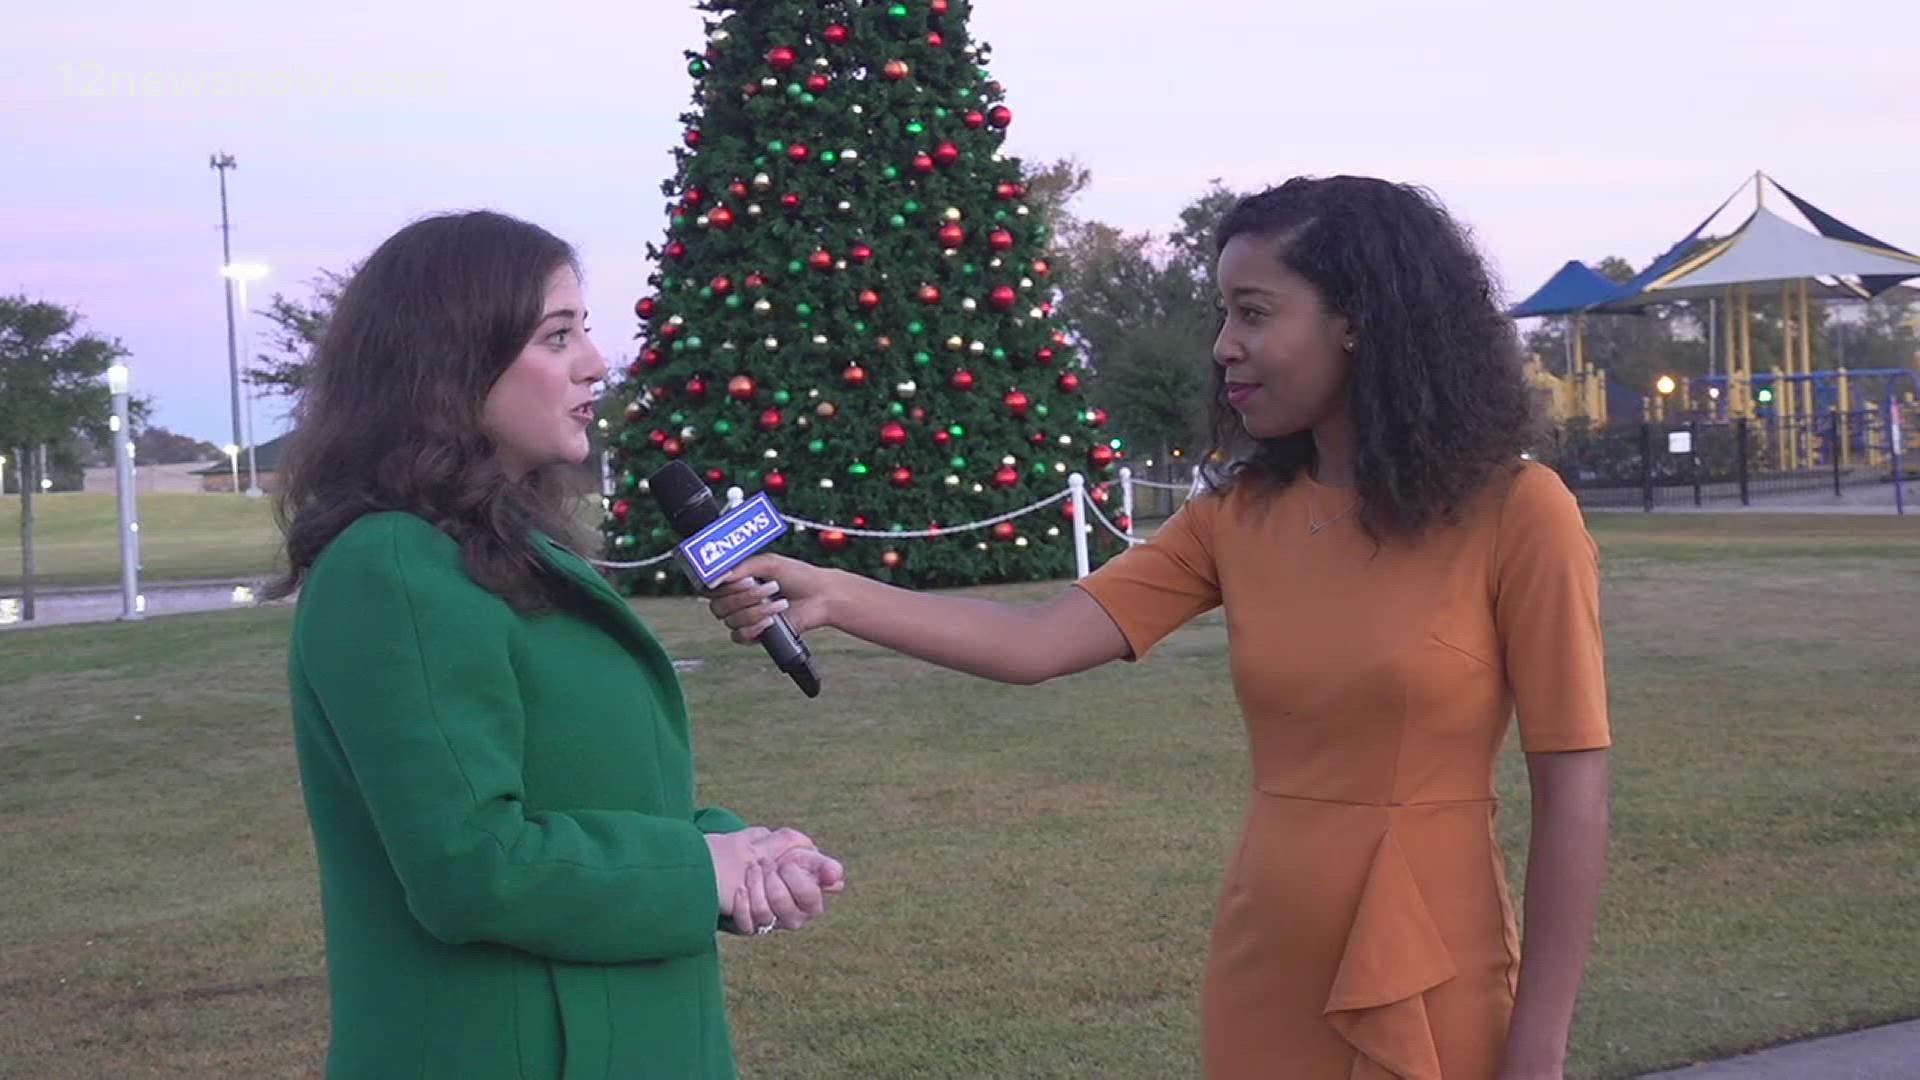 The city of Beaumont will be hosting its annual tree lighting at 5:30 pm at the Downtown Event Centre tonight with food, activities, movies on the lawn and more.